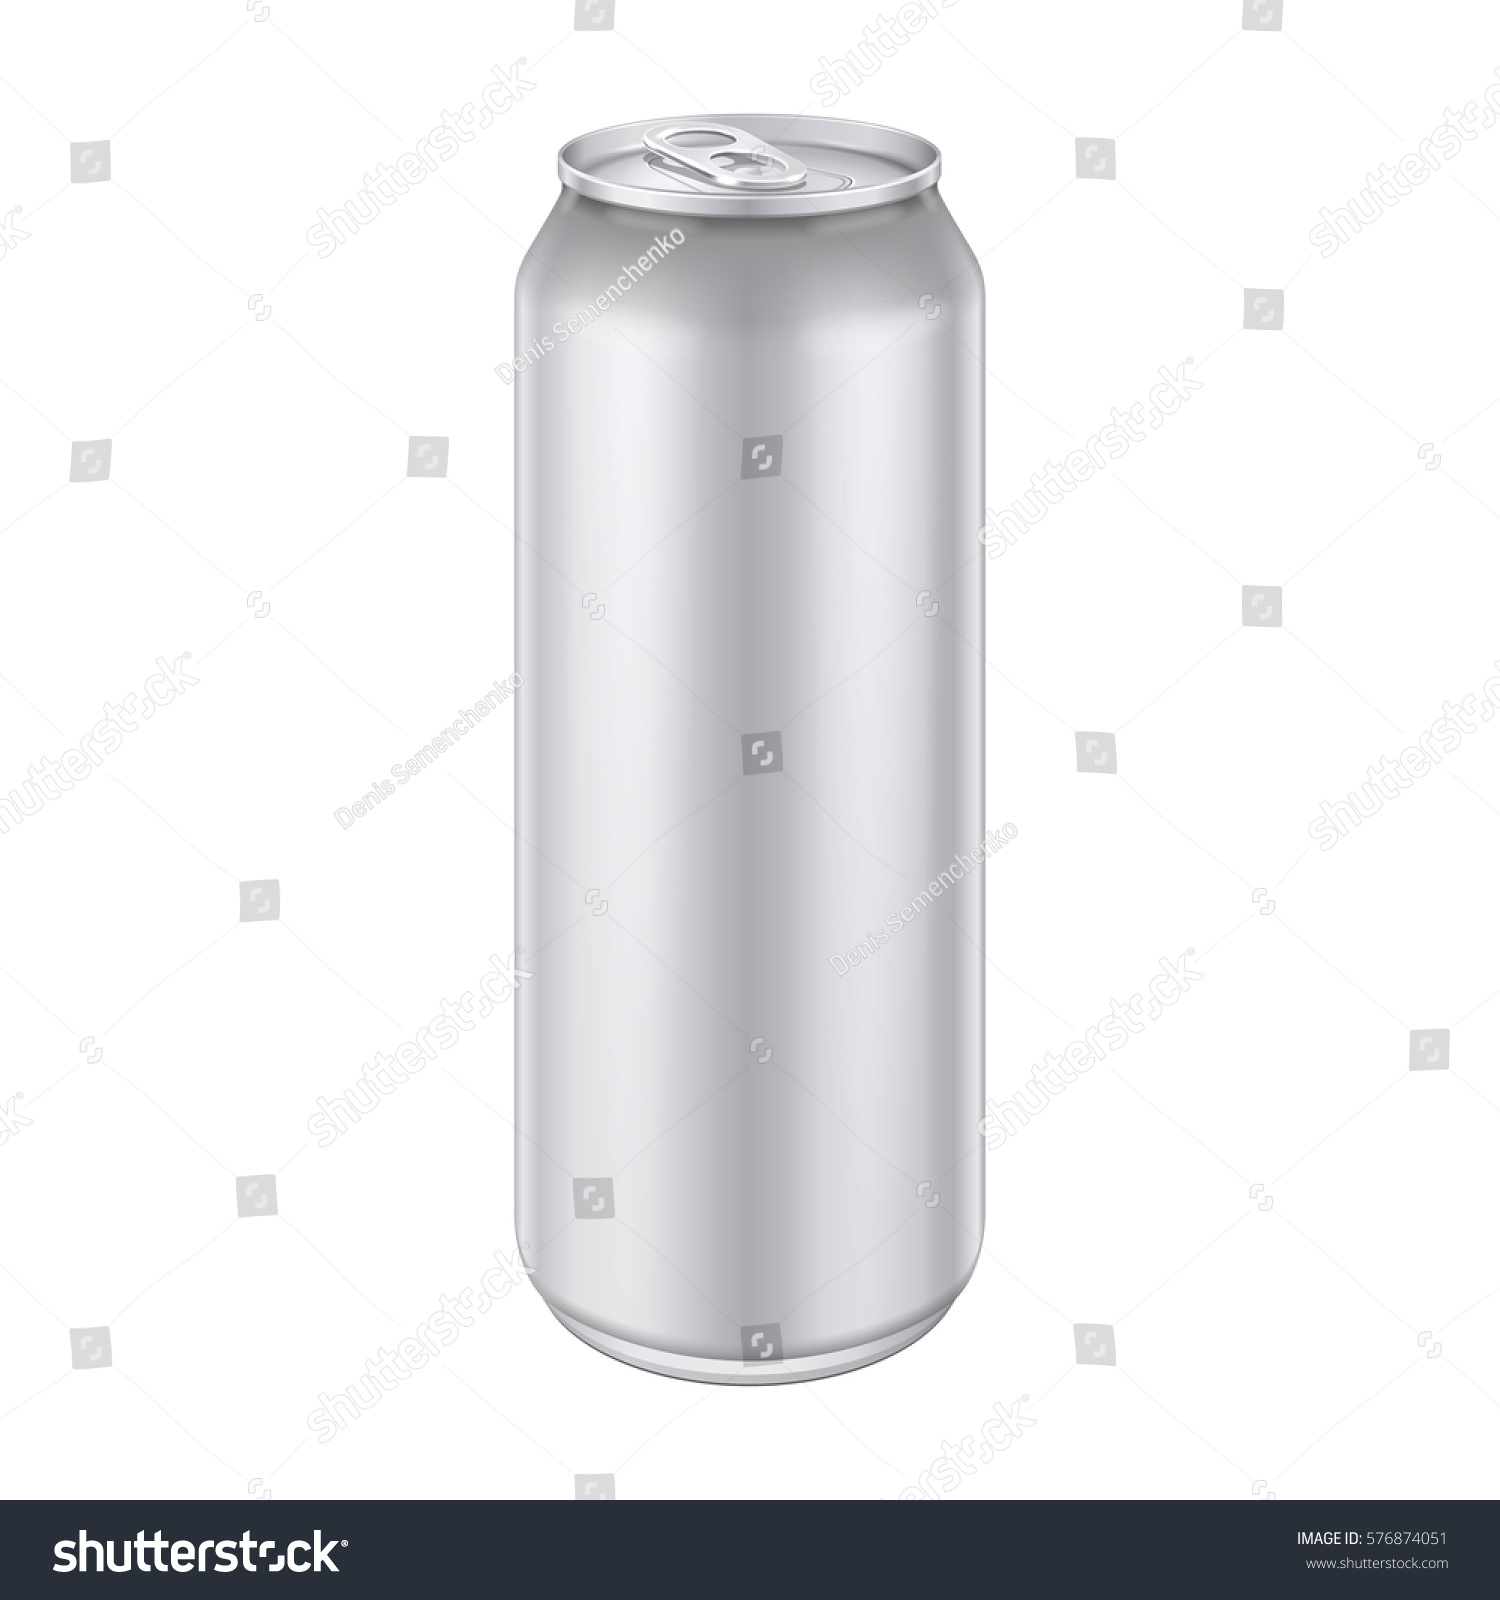 SVG of Metal Aluminum Beverage Drink Can 500ml, 0,5L. Mockup Template Ready For Your Design. Isolated On White Background. Product Packing. Vector EPS10 svg